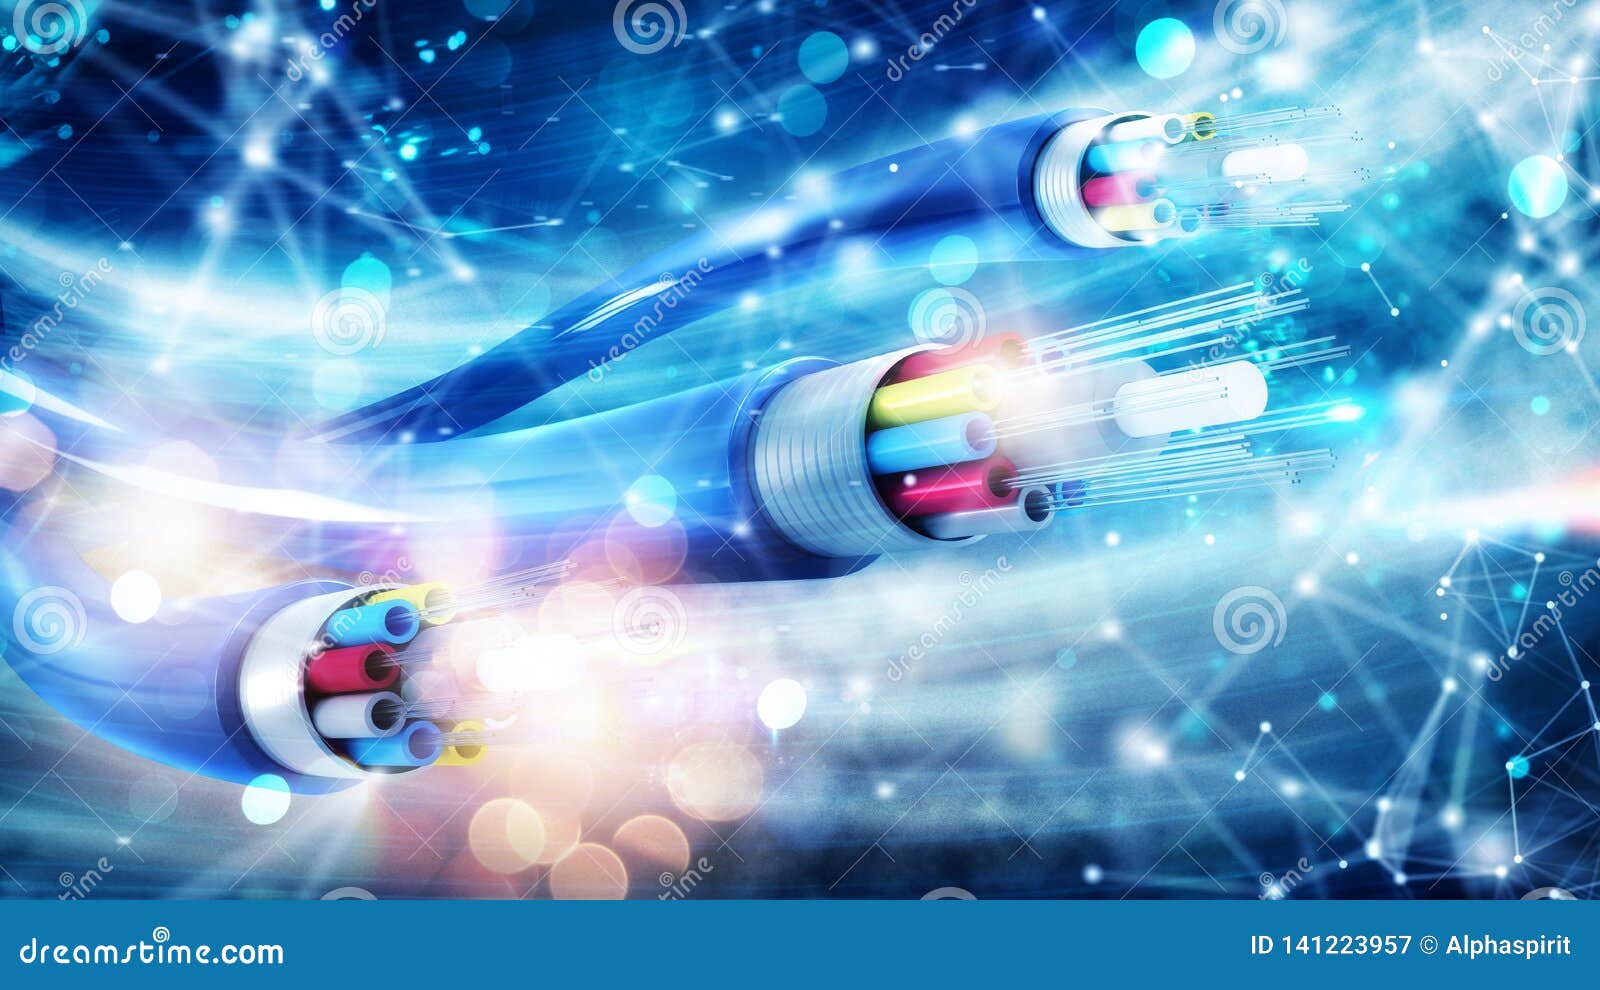 internet connection with optical fiber. concept of fast internet